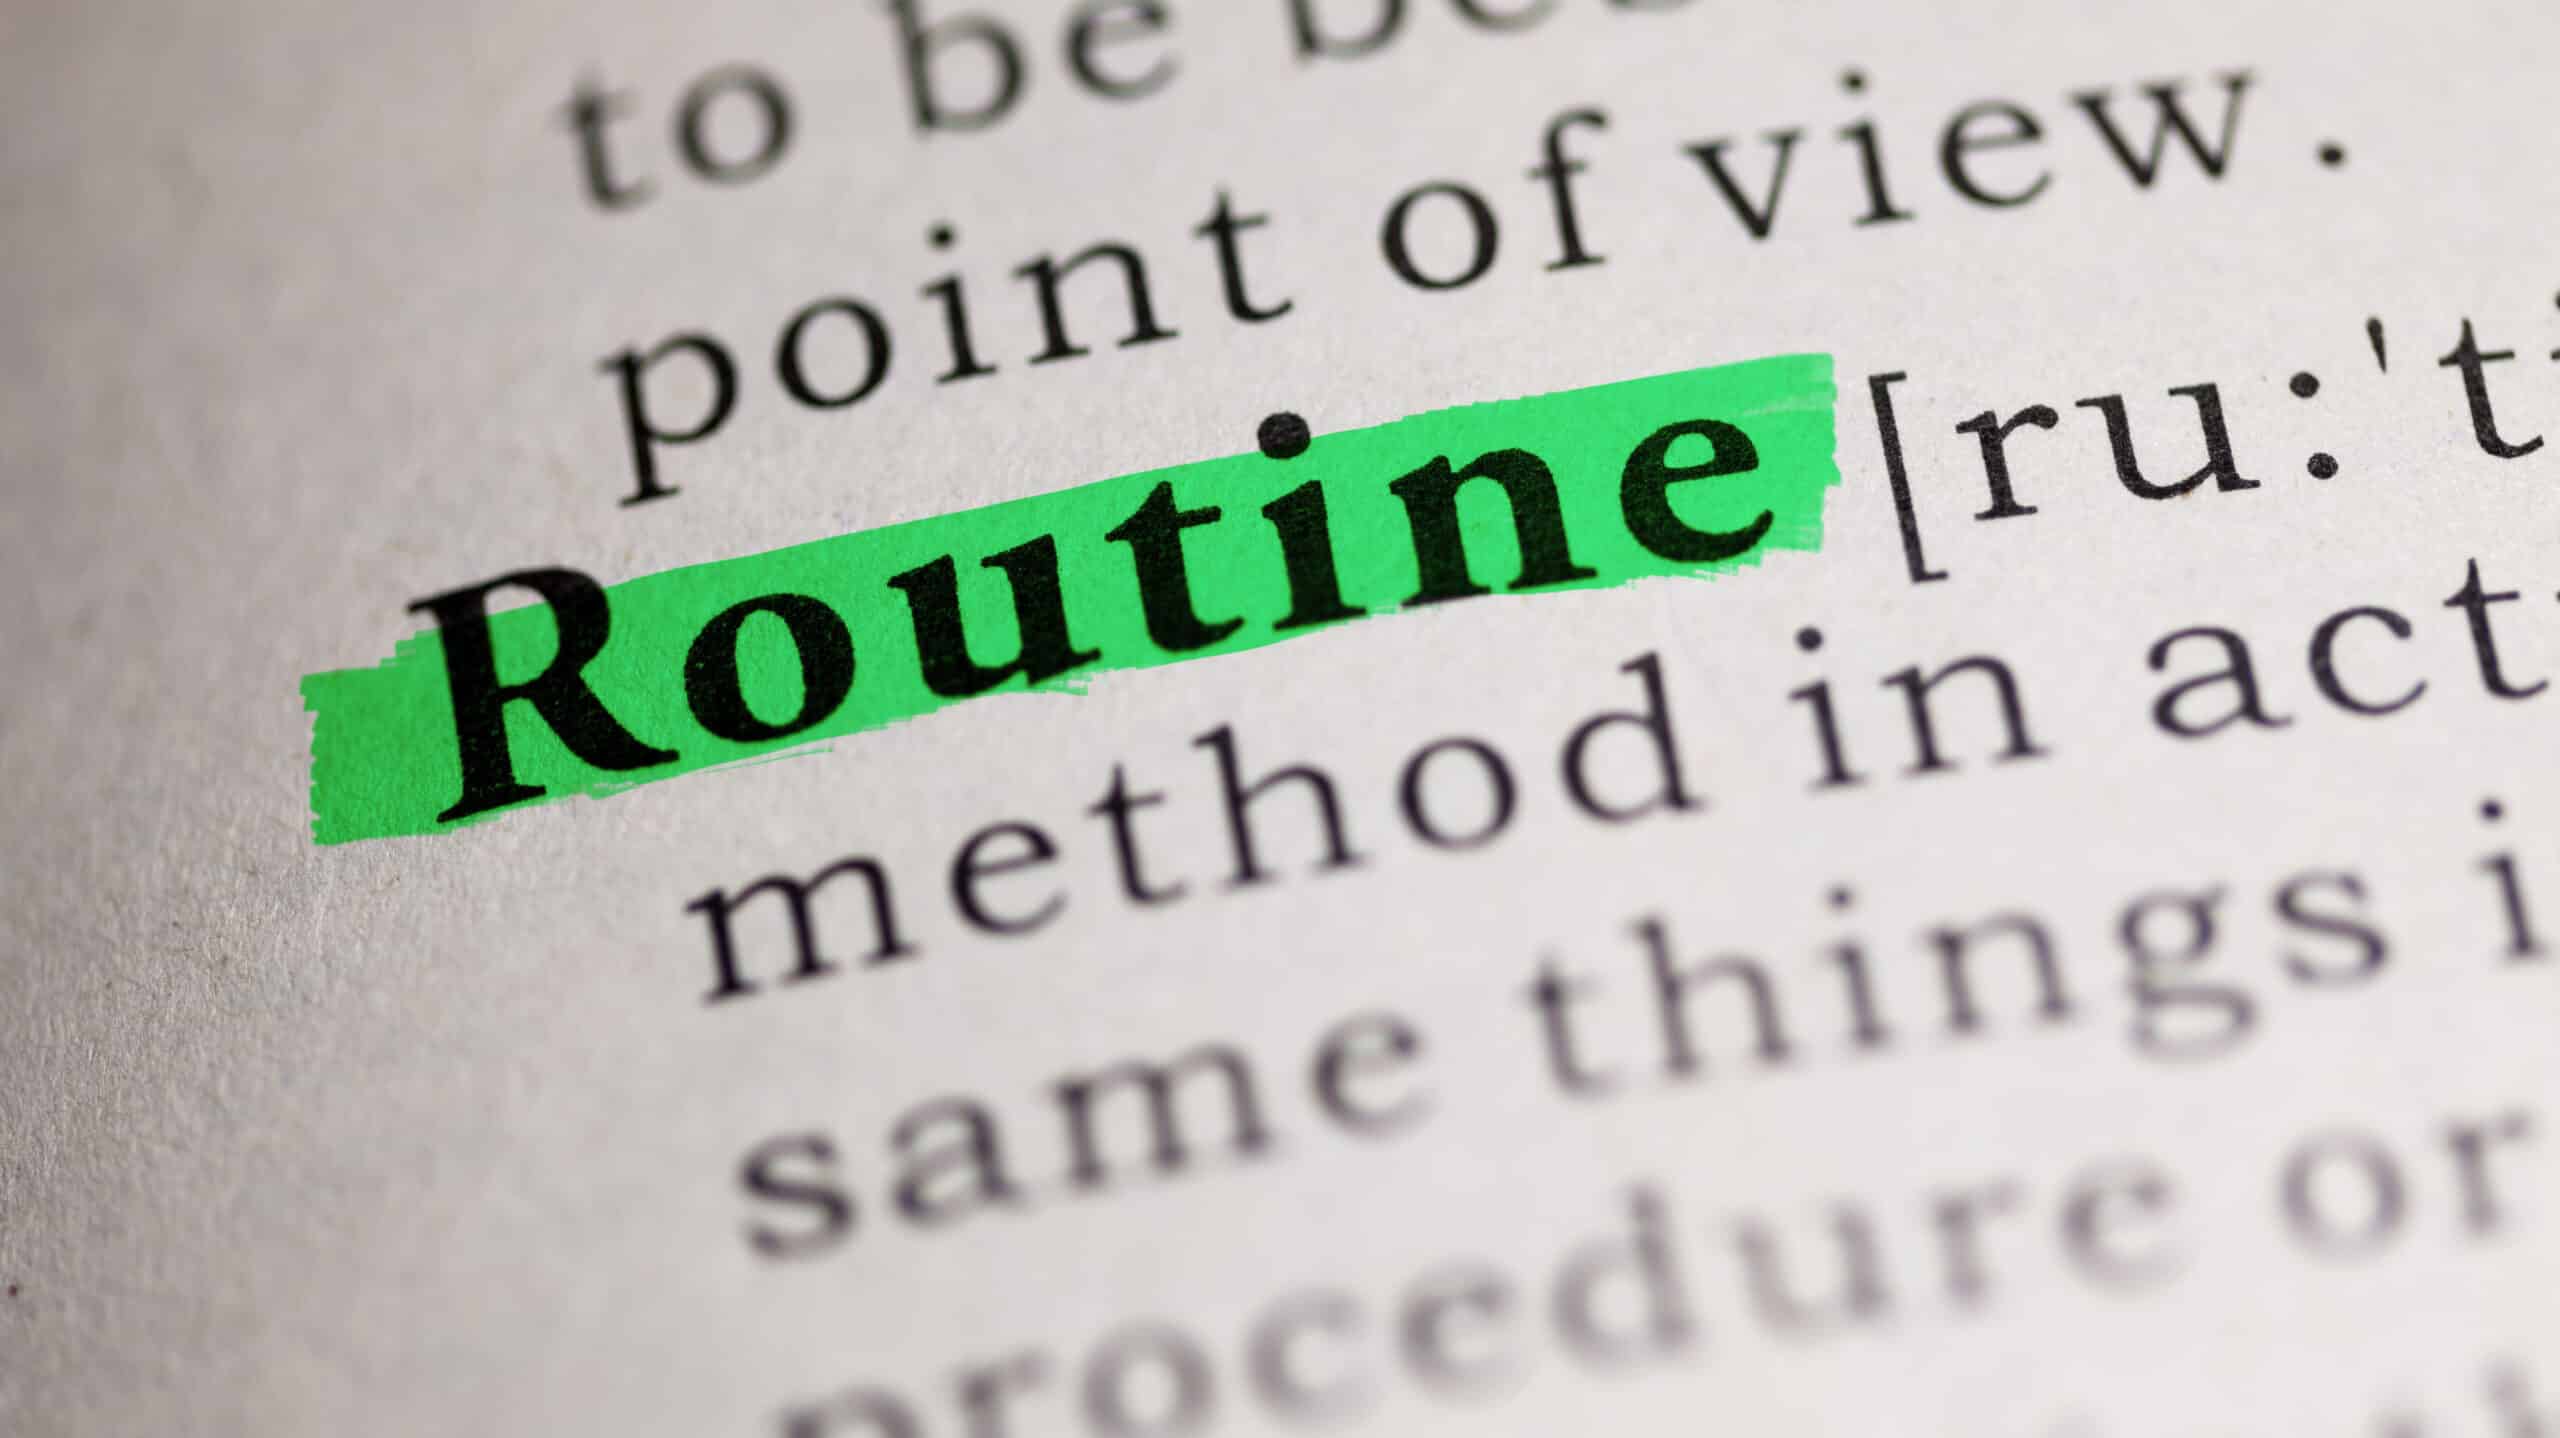 A dictionary definition page with the word "Routine" highlighted - Developing A Healthy Daily Routine In Recovery